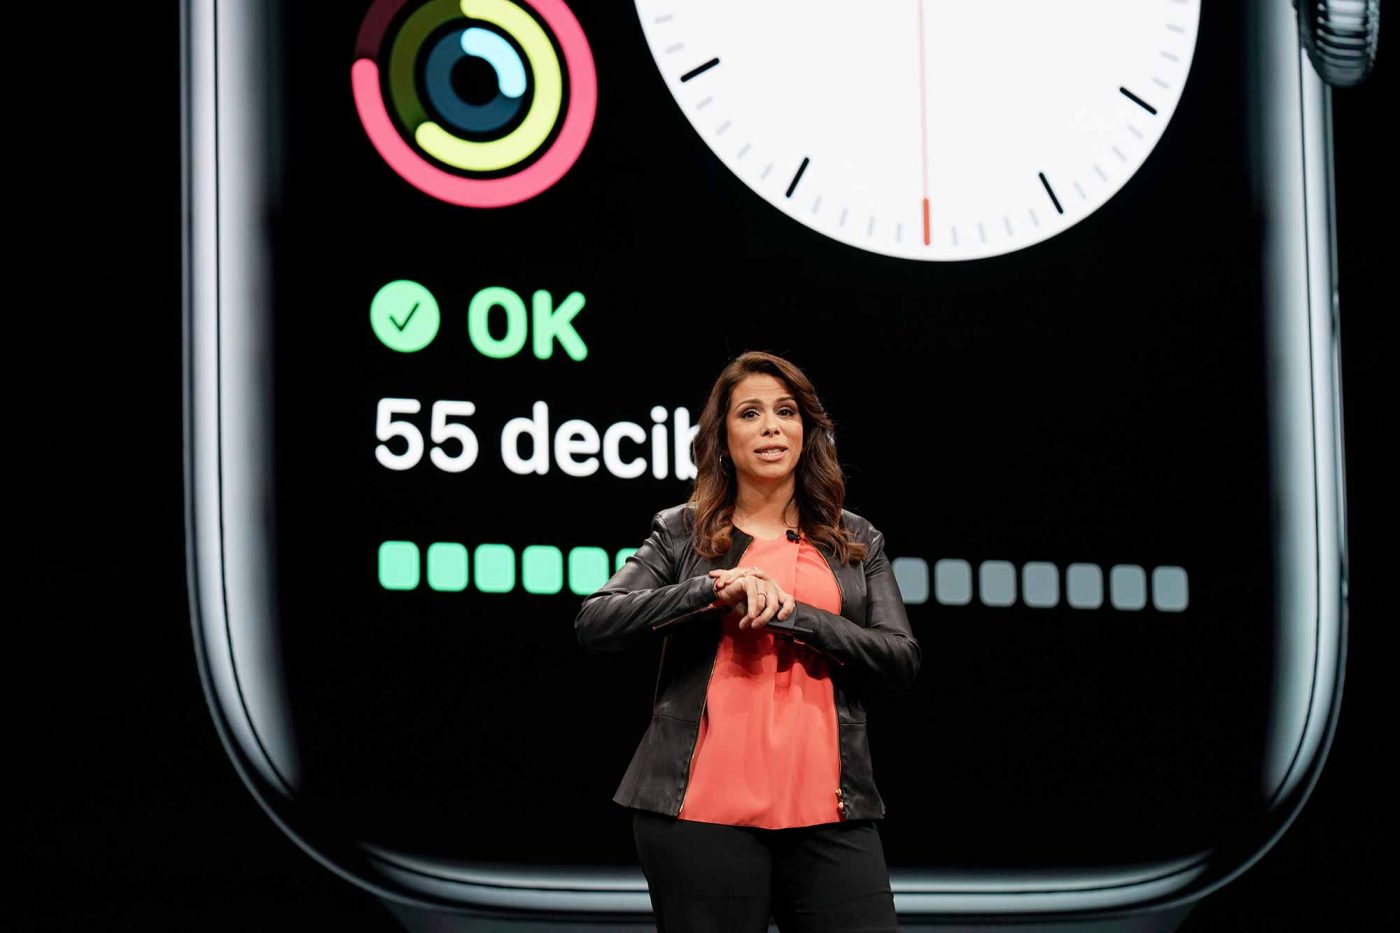 watchOS 6 noise app presented at WWDC